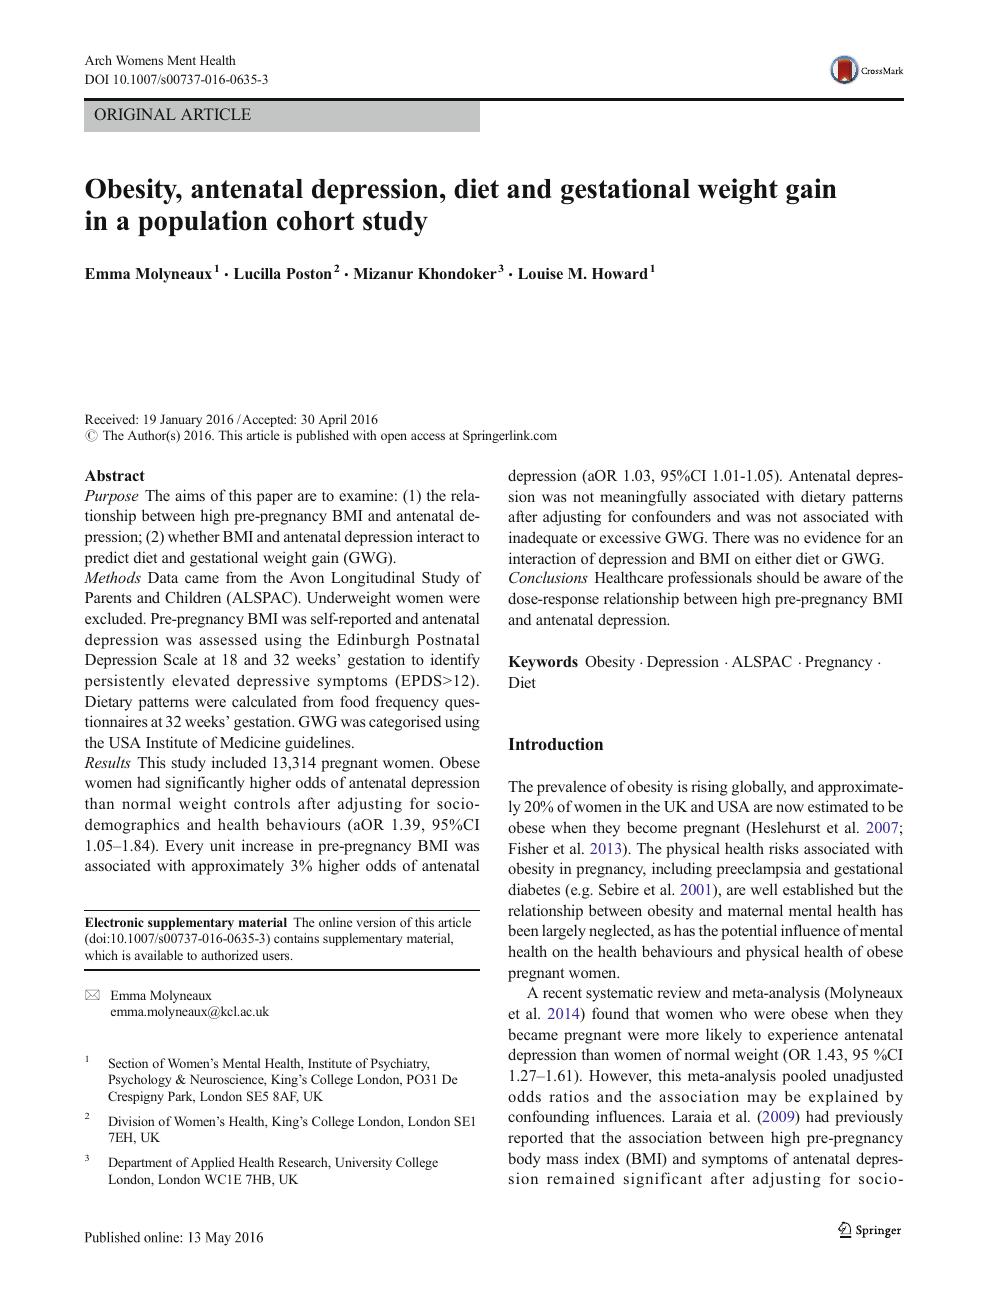 Obesity Antenatal Depression Diet And Gestational Weight Gain In